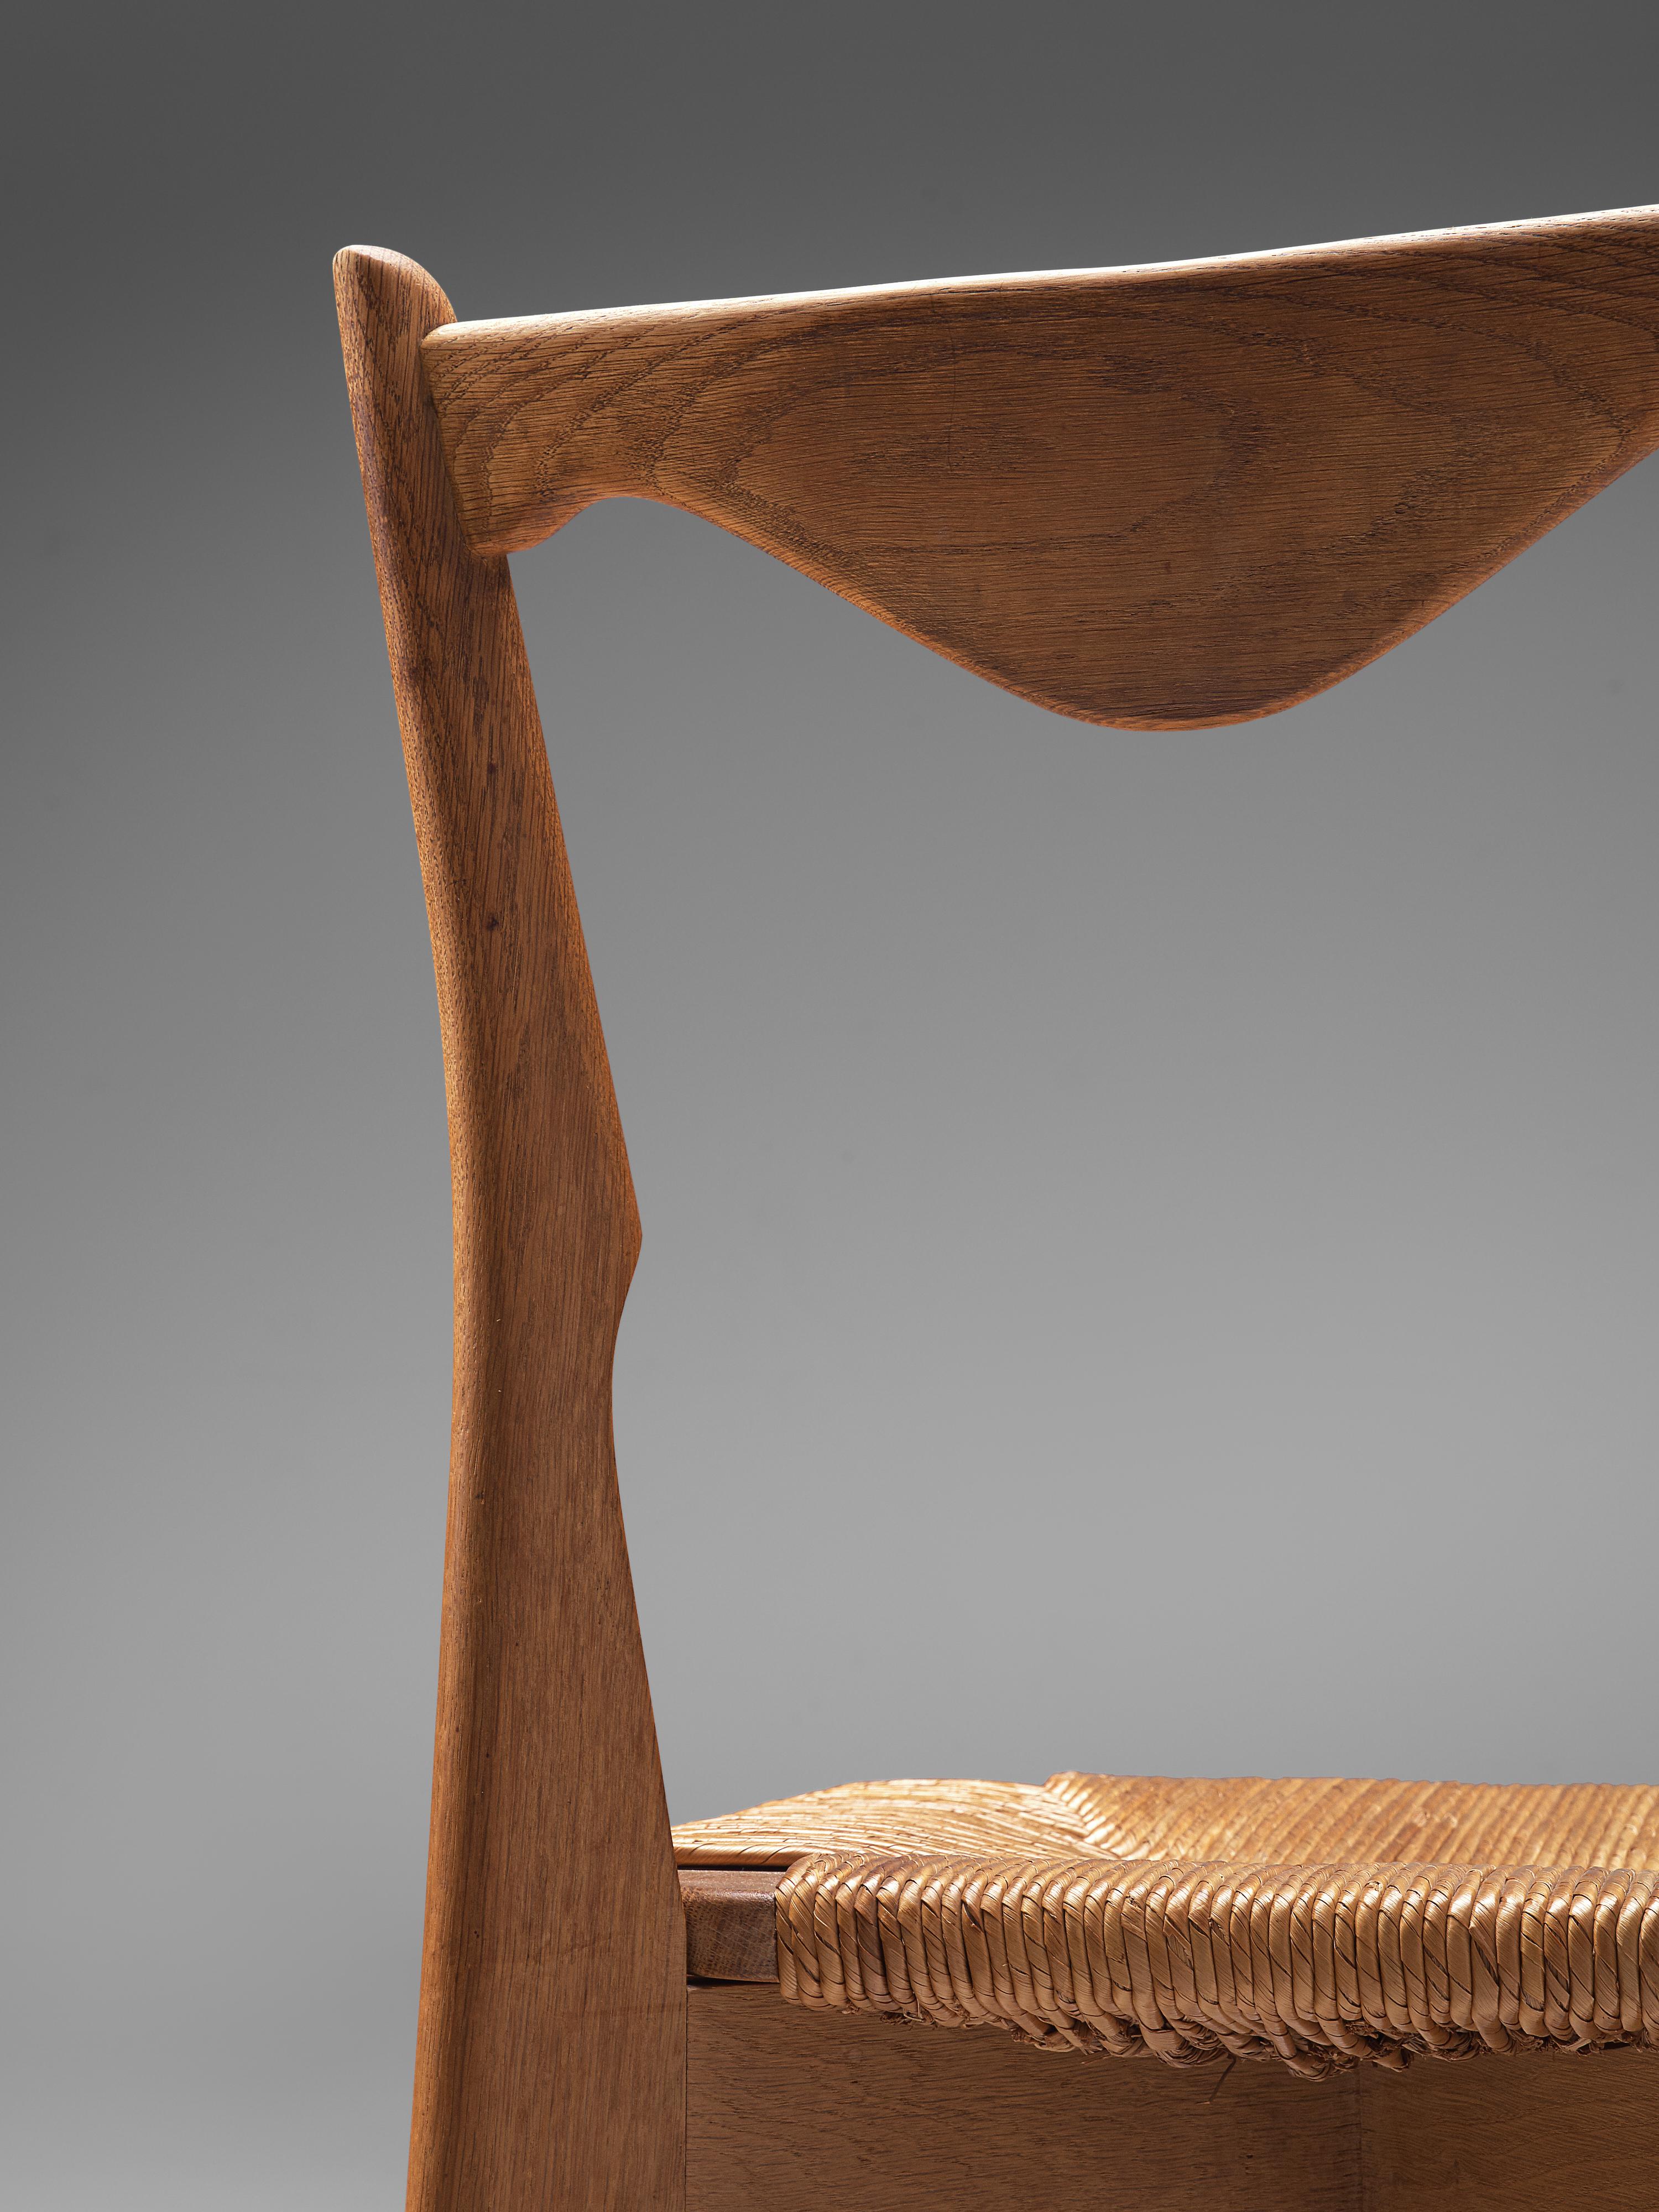 Guillerme et Chambron Set of 10 Dining Chairs in Oak and Straw Seats 1